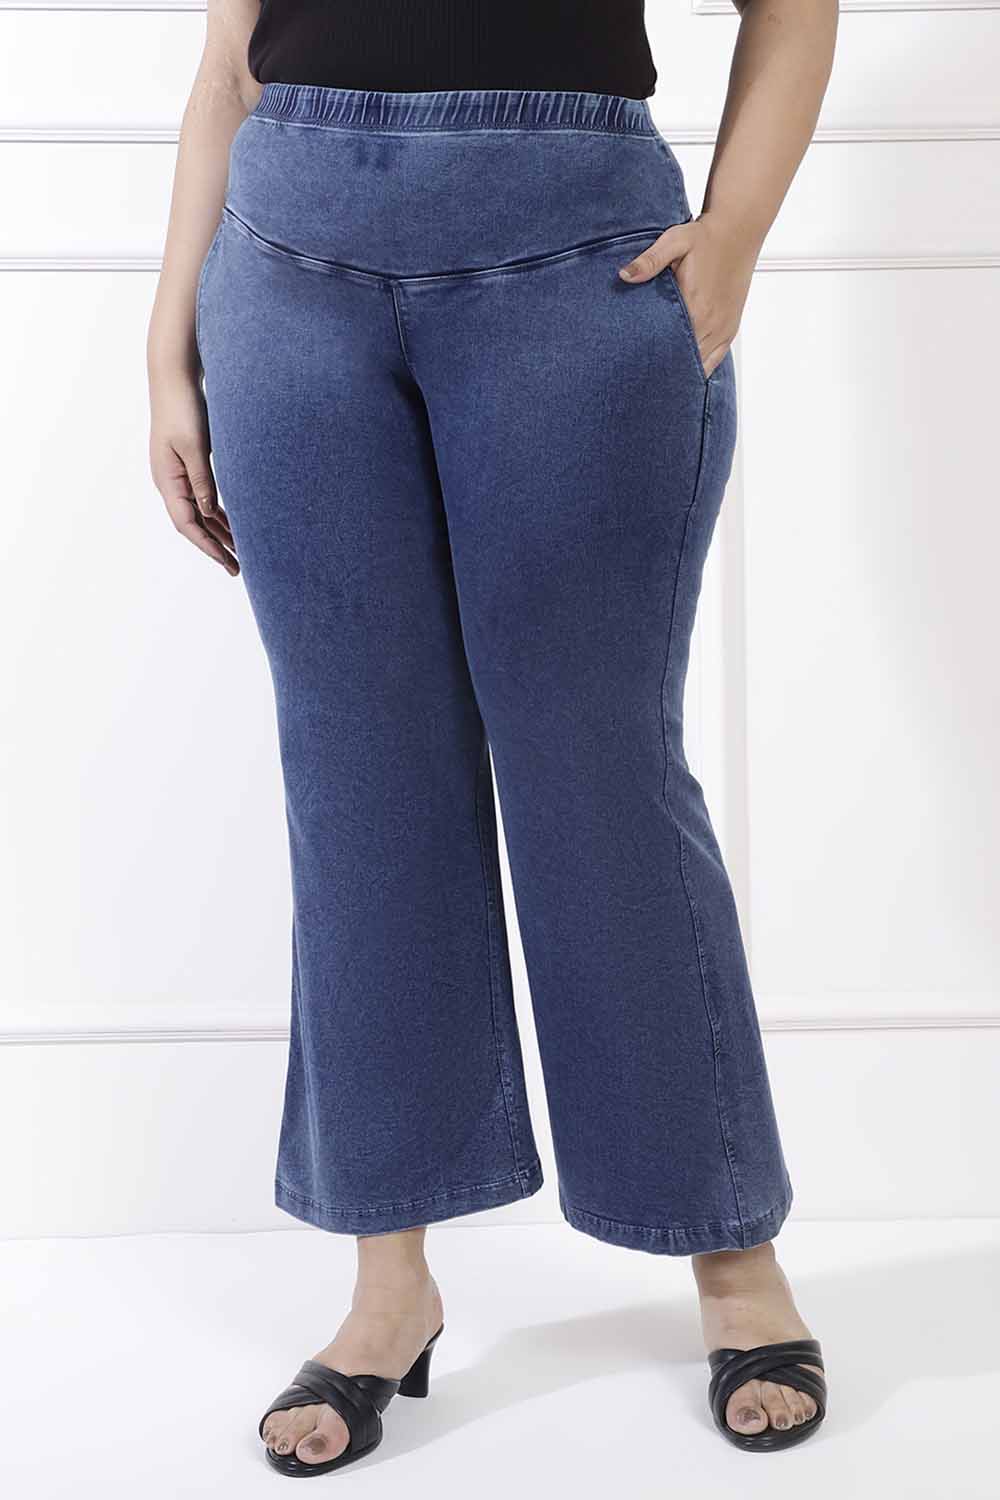 Buy Yale Blue Flare Jeans